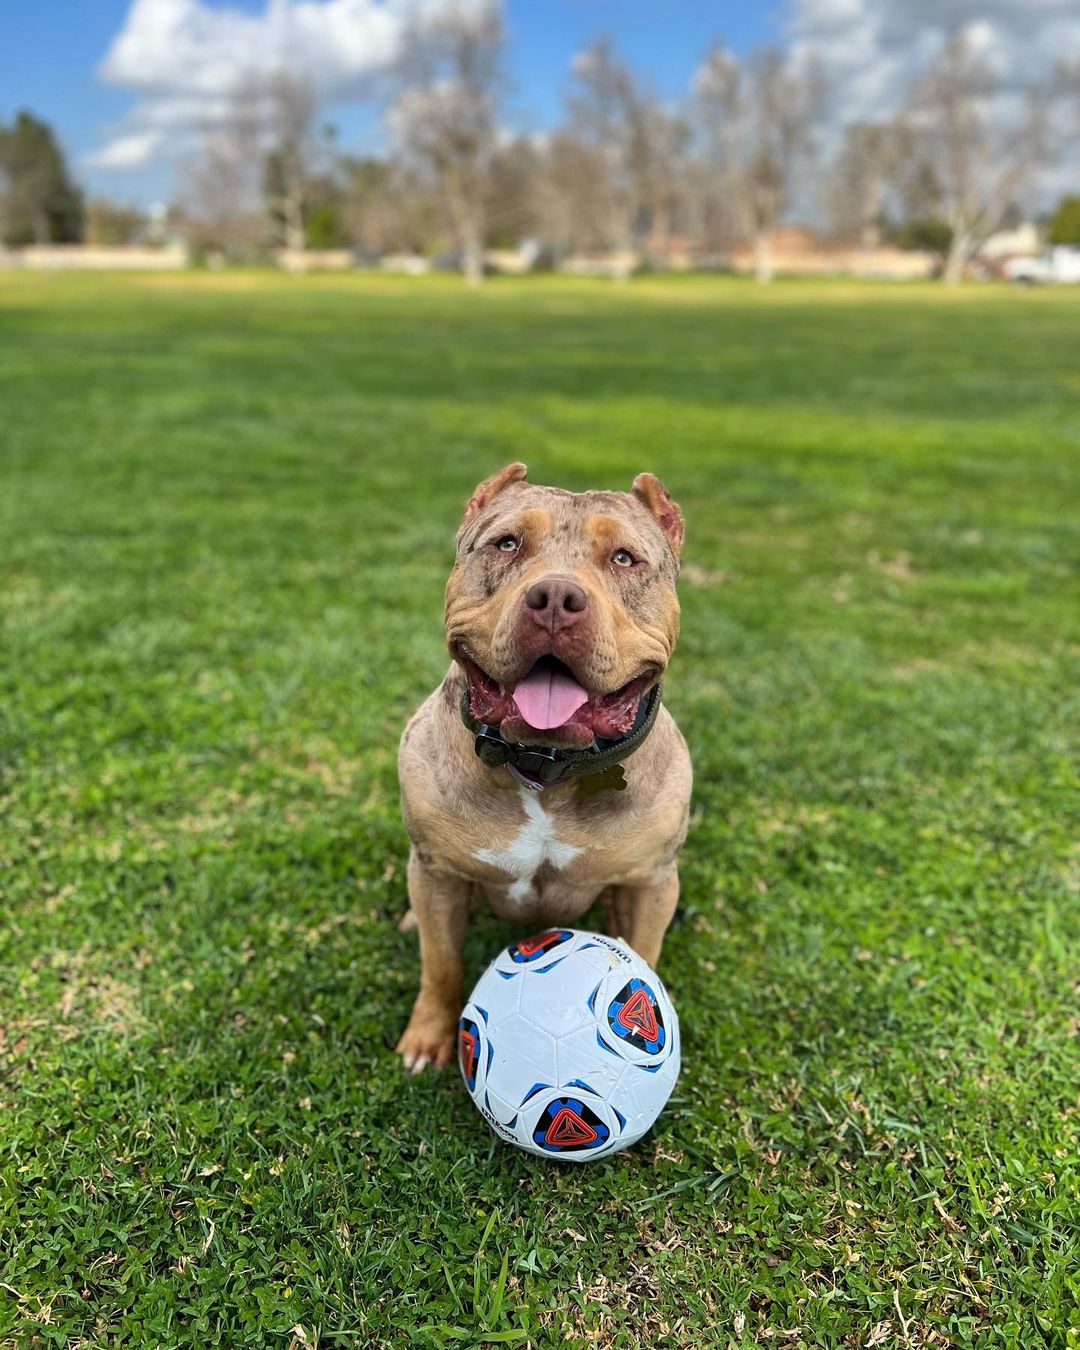 dog sitting on grass with a ball